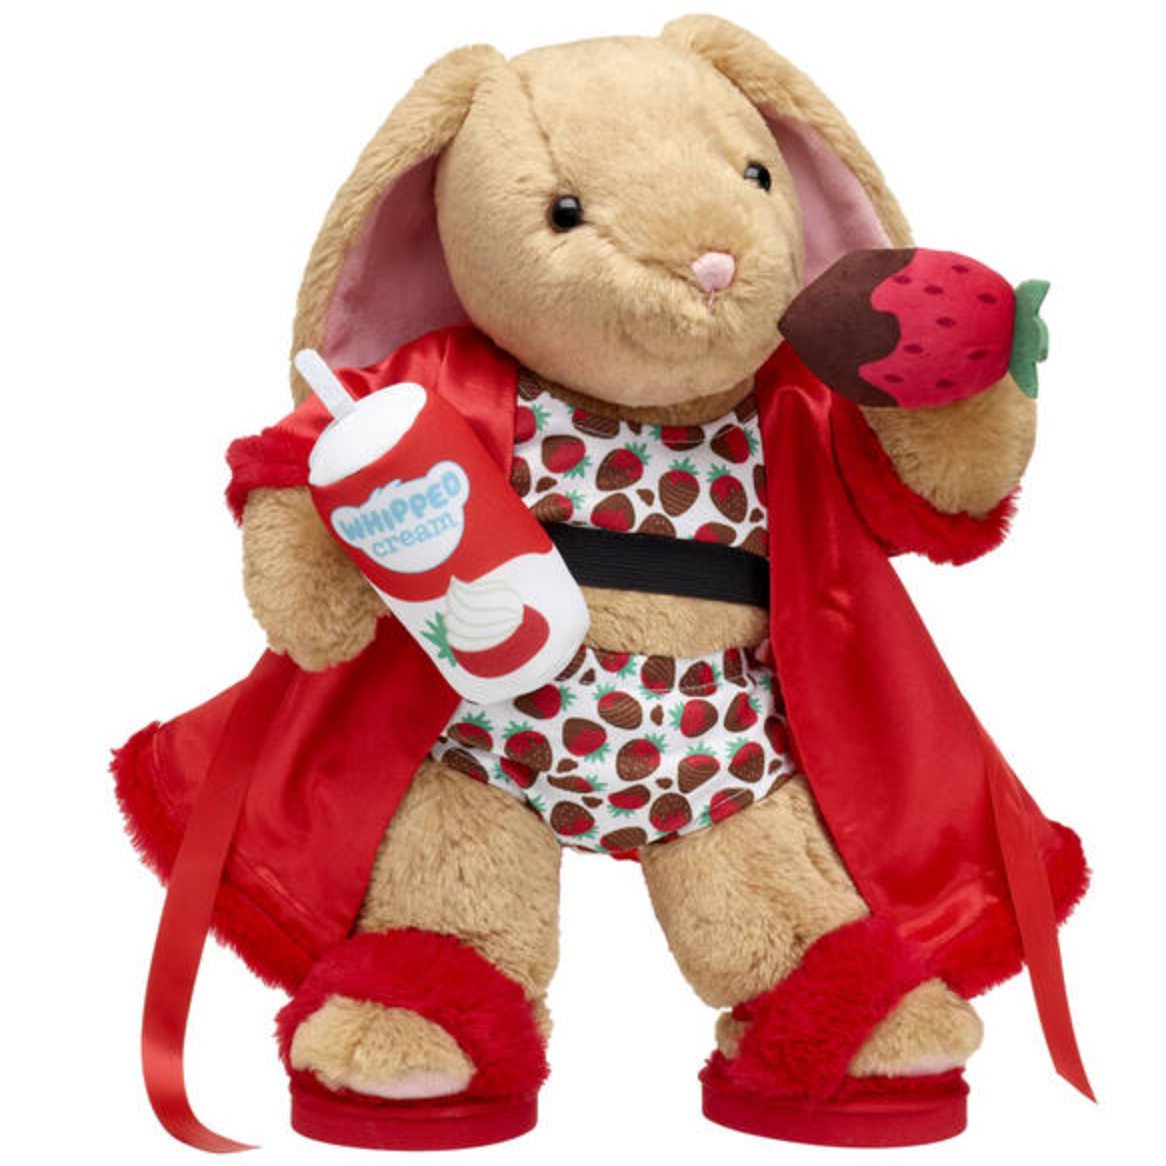 The Build A Bear Workshop After Dark Collection Grown Up Teddy Bears